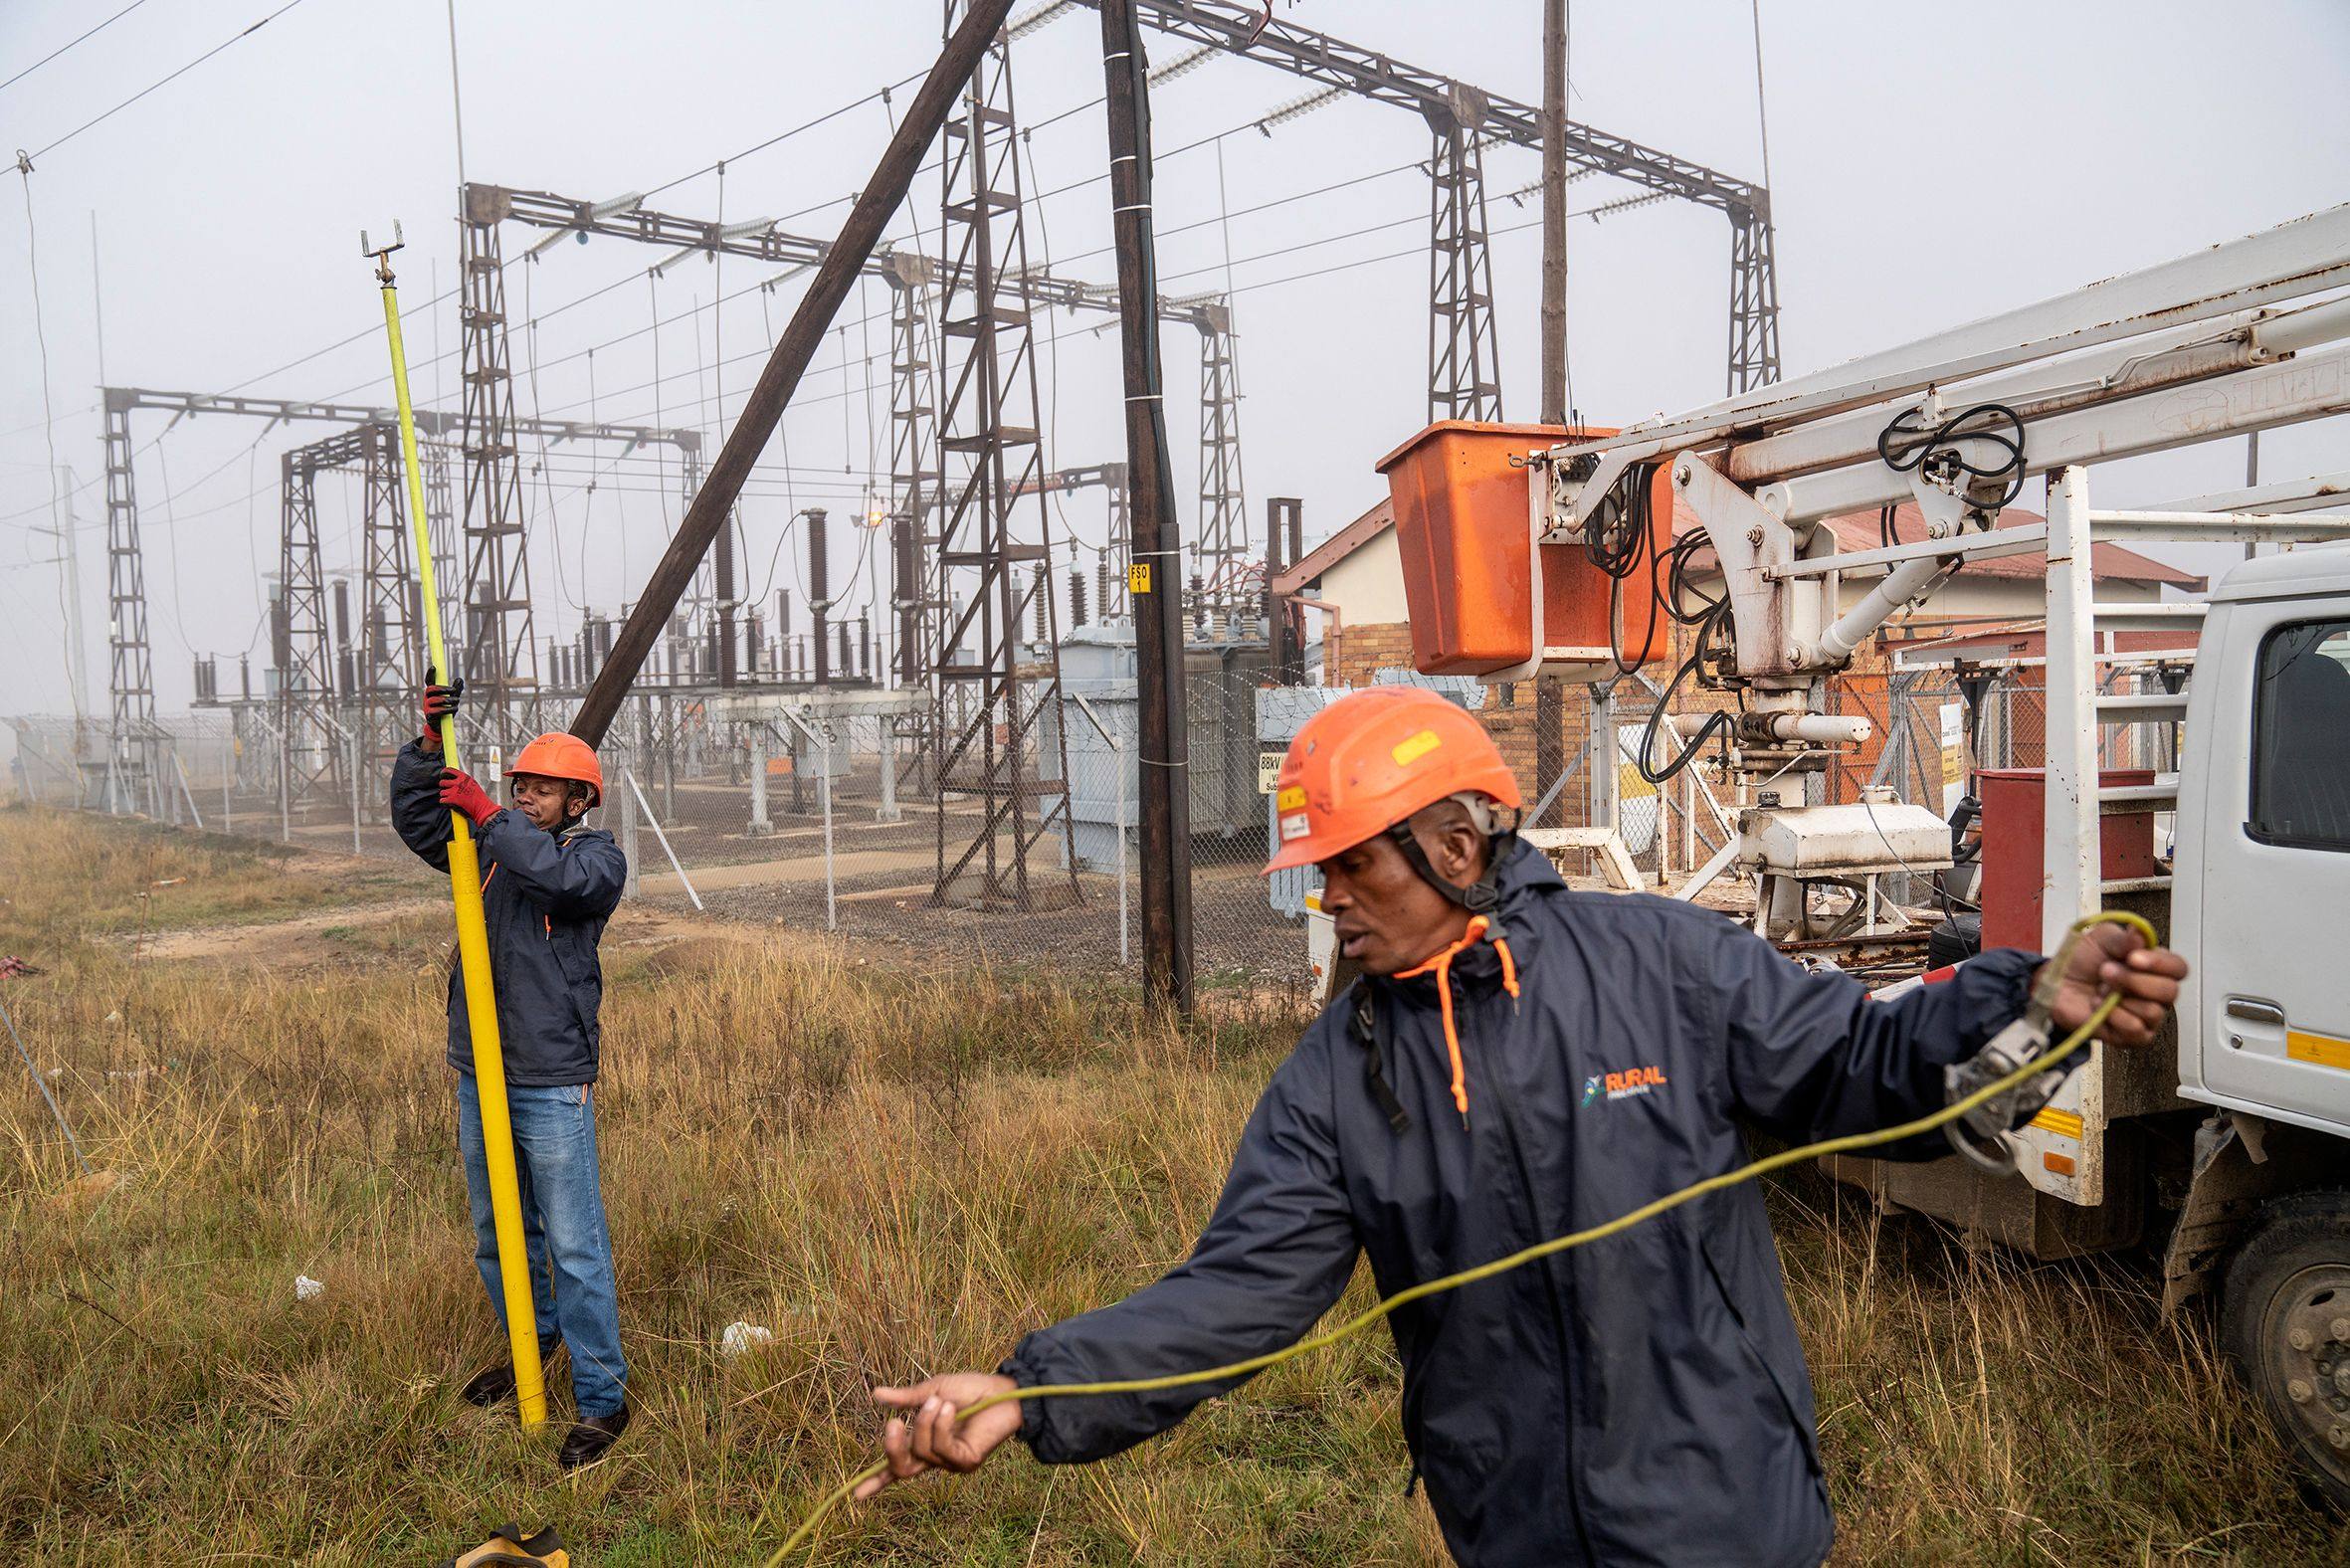 Workers conduct maintenance on the power grid in Villiers, South Africa, on May 10. The European Union’s Global Gateway initiative envisions infrastructure initiatives that can improve connectivity, stimulate trade and raise living standards throughout Africa. Photo: AFP